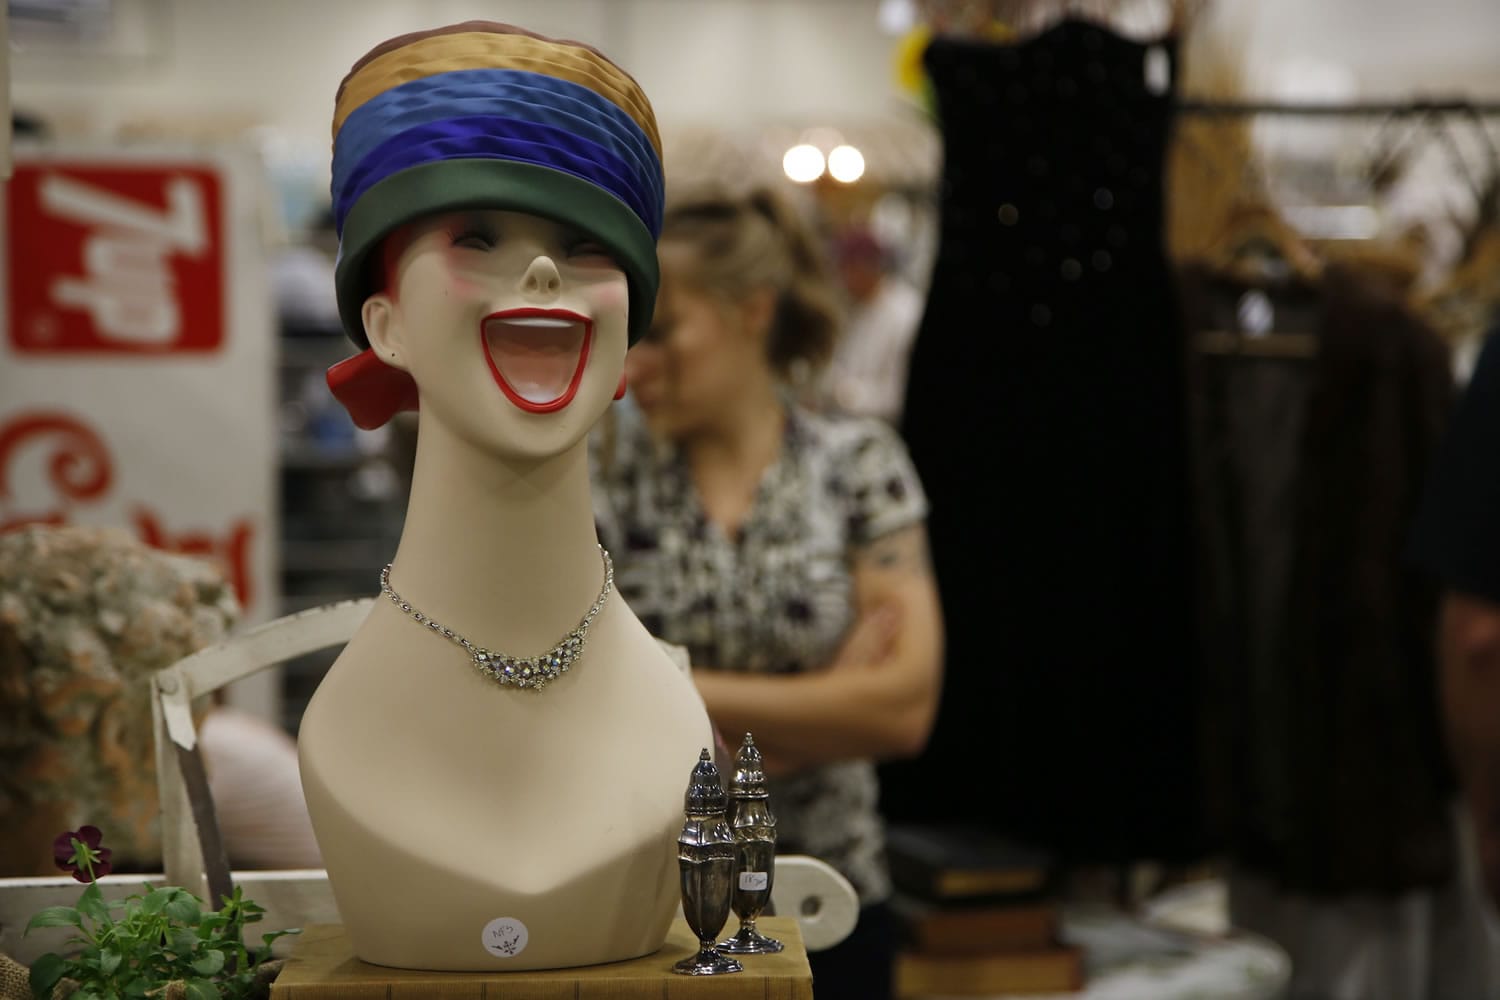 A vintage hat, rhinestone necklace and silver salt-and-pepper shaker set were among the thousands of items for sale this weekend at the Junk Bonanza.